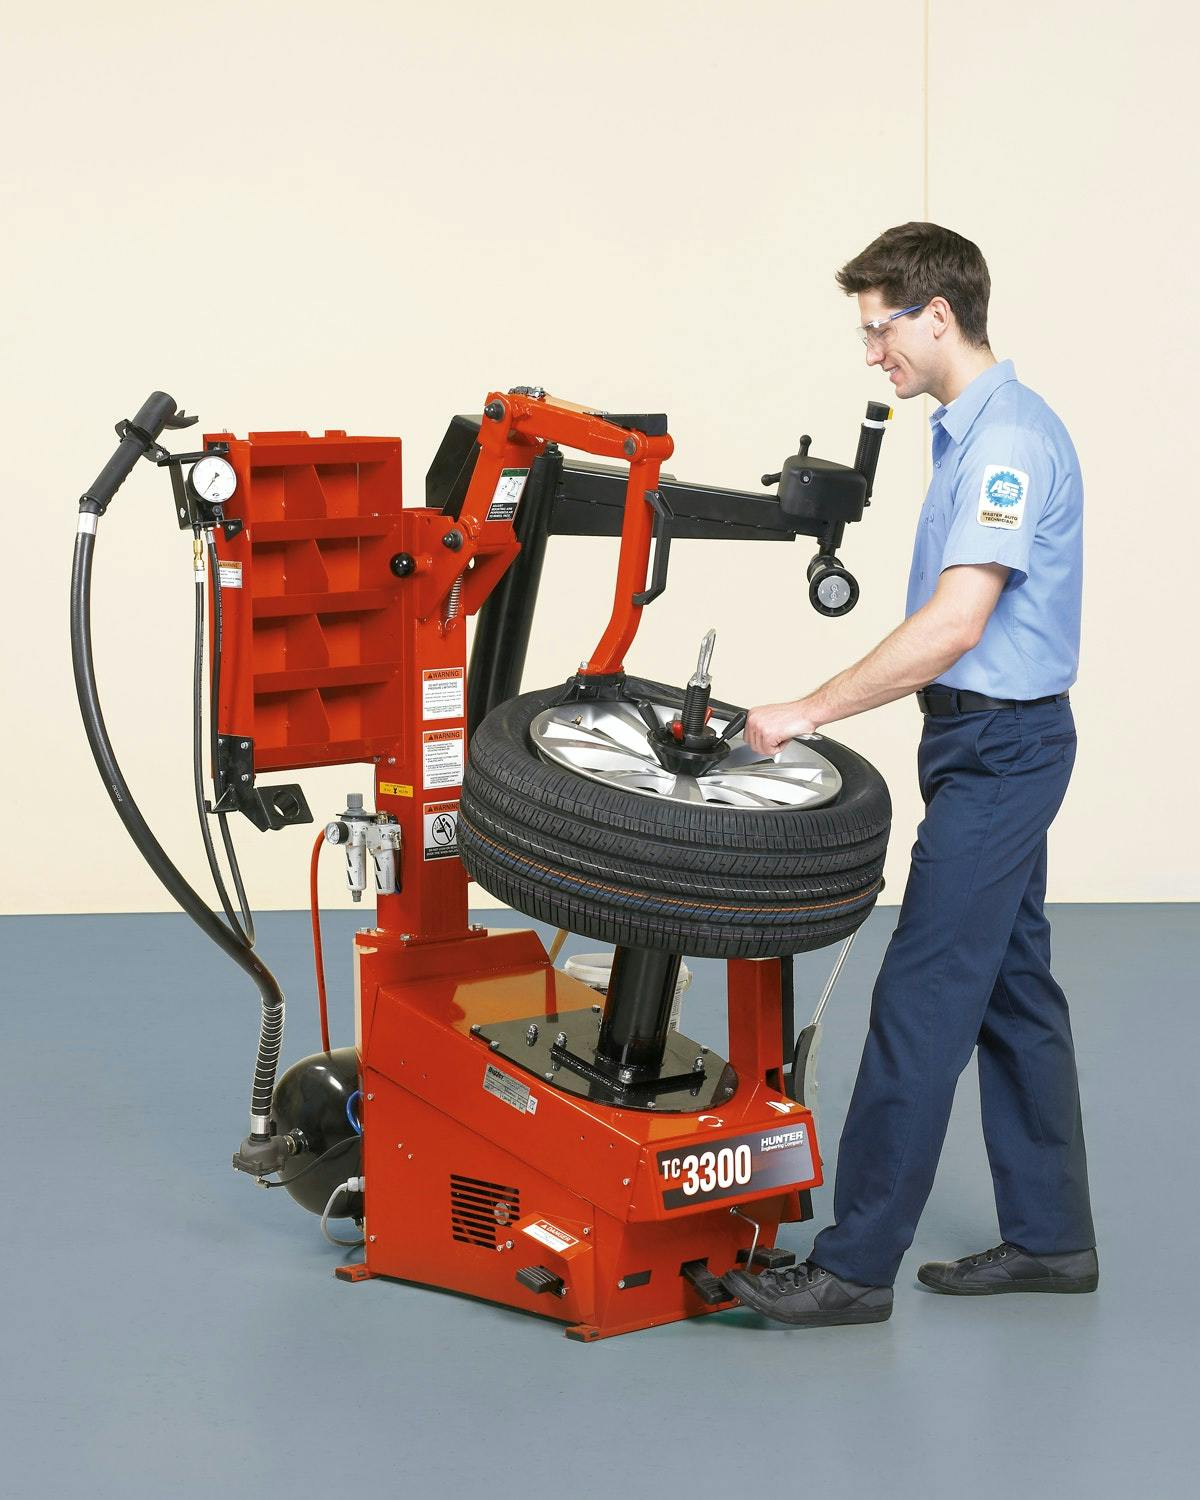 hunter-adds-to-tire-changer-line-with-tc3300